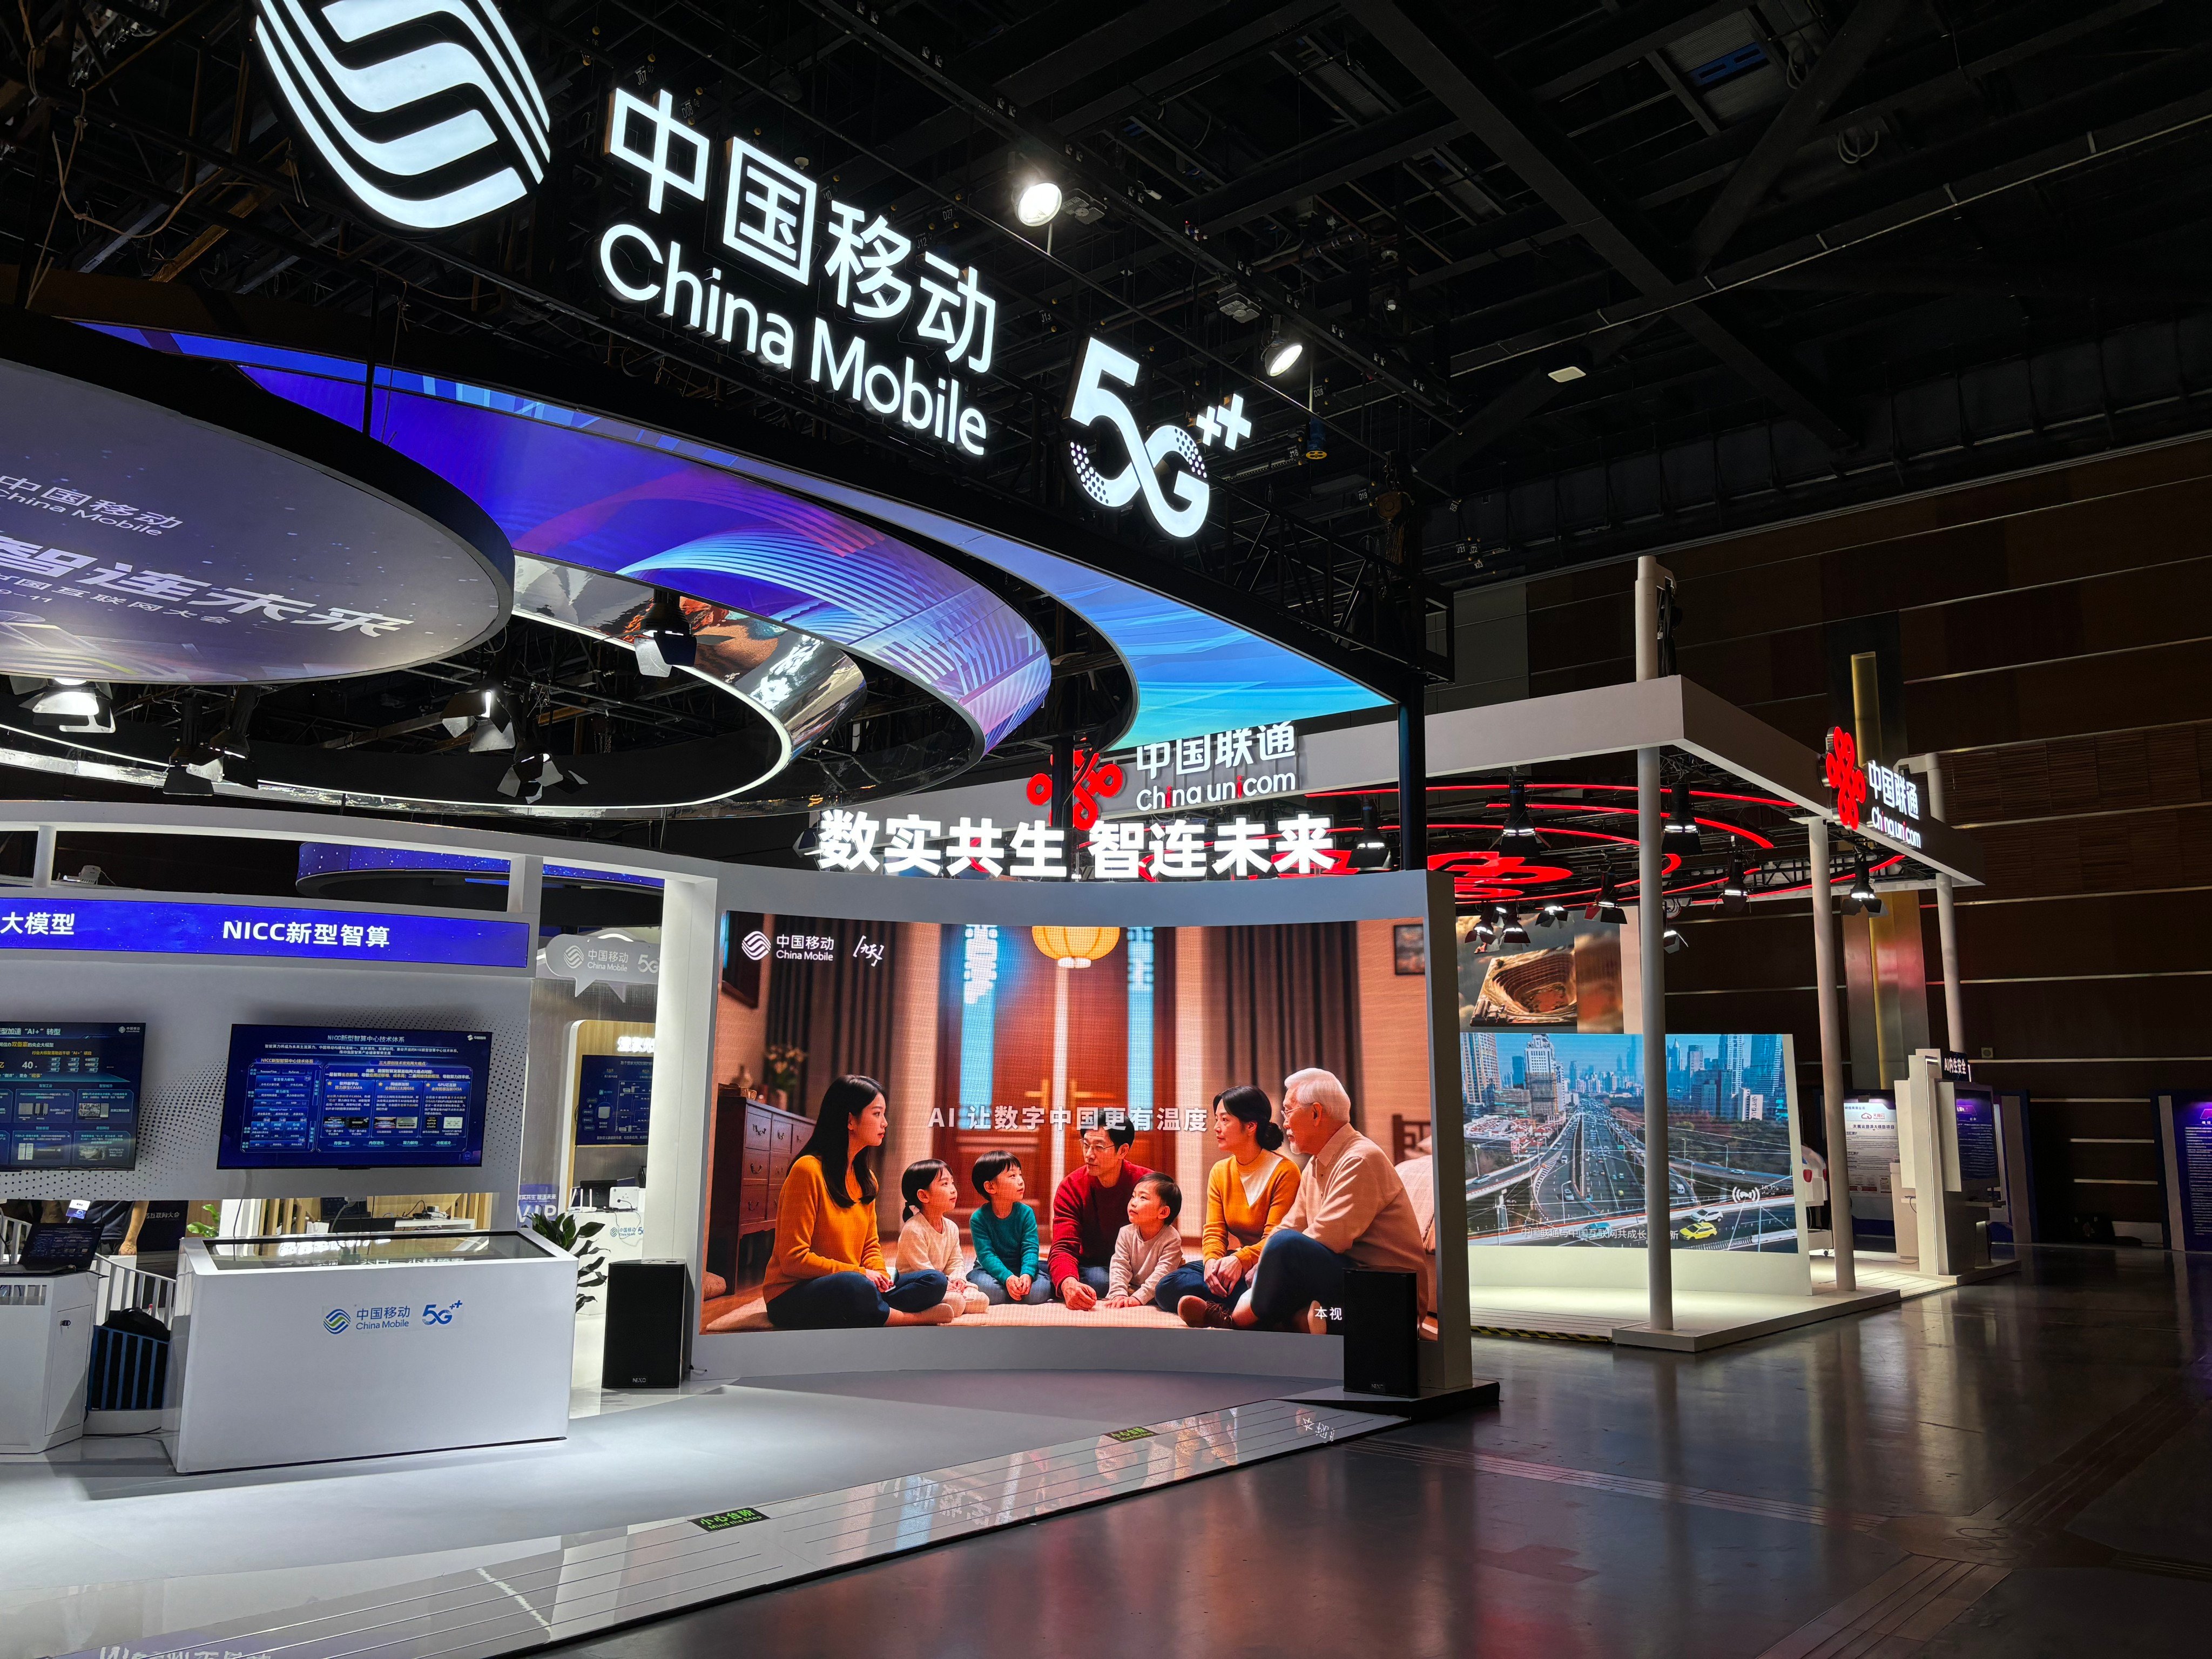 State-backed enterprises including China Mobile showcased their AI solutions at the China Internet Conference this week. Photo: Ben Jiang